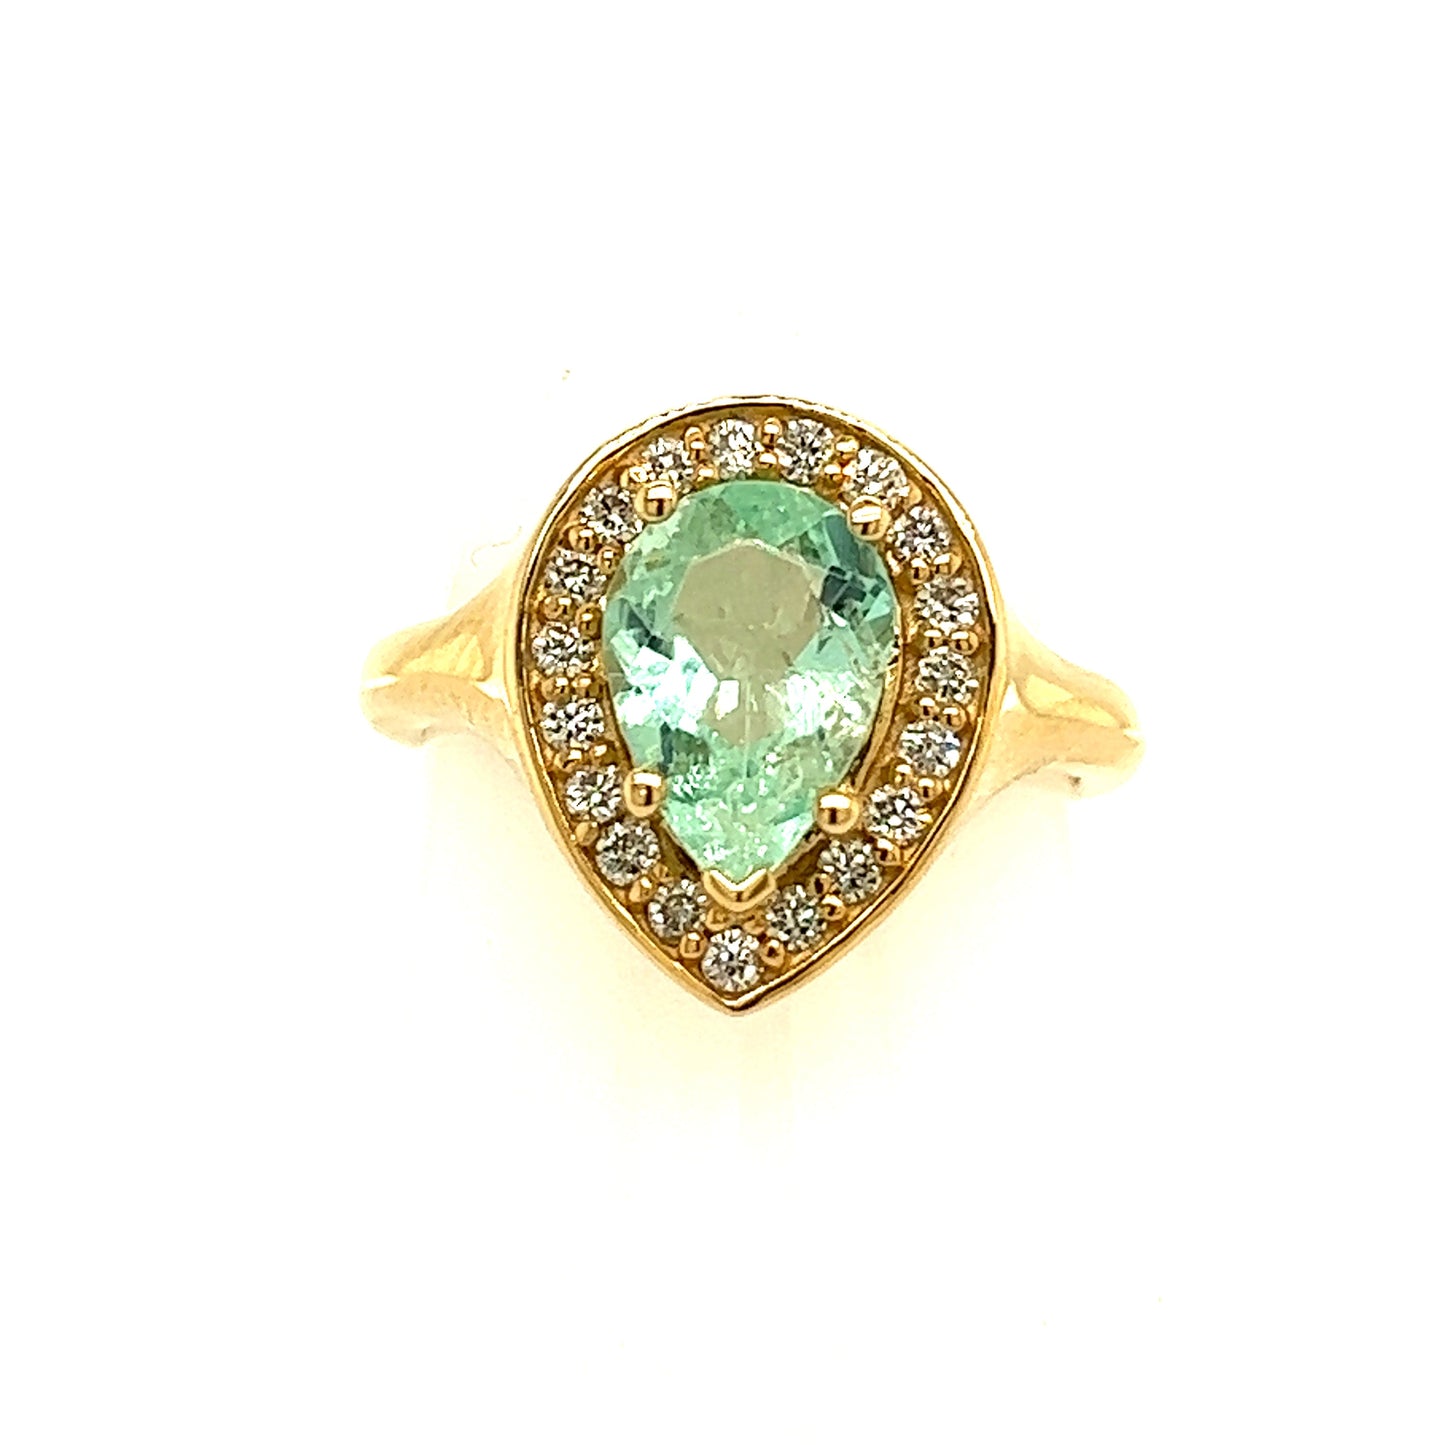 Natural Emerald Diamond Ring Size 6.5 14k Y Gold 1.74 TCW Certified $4,950 216677